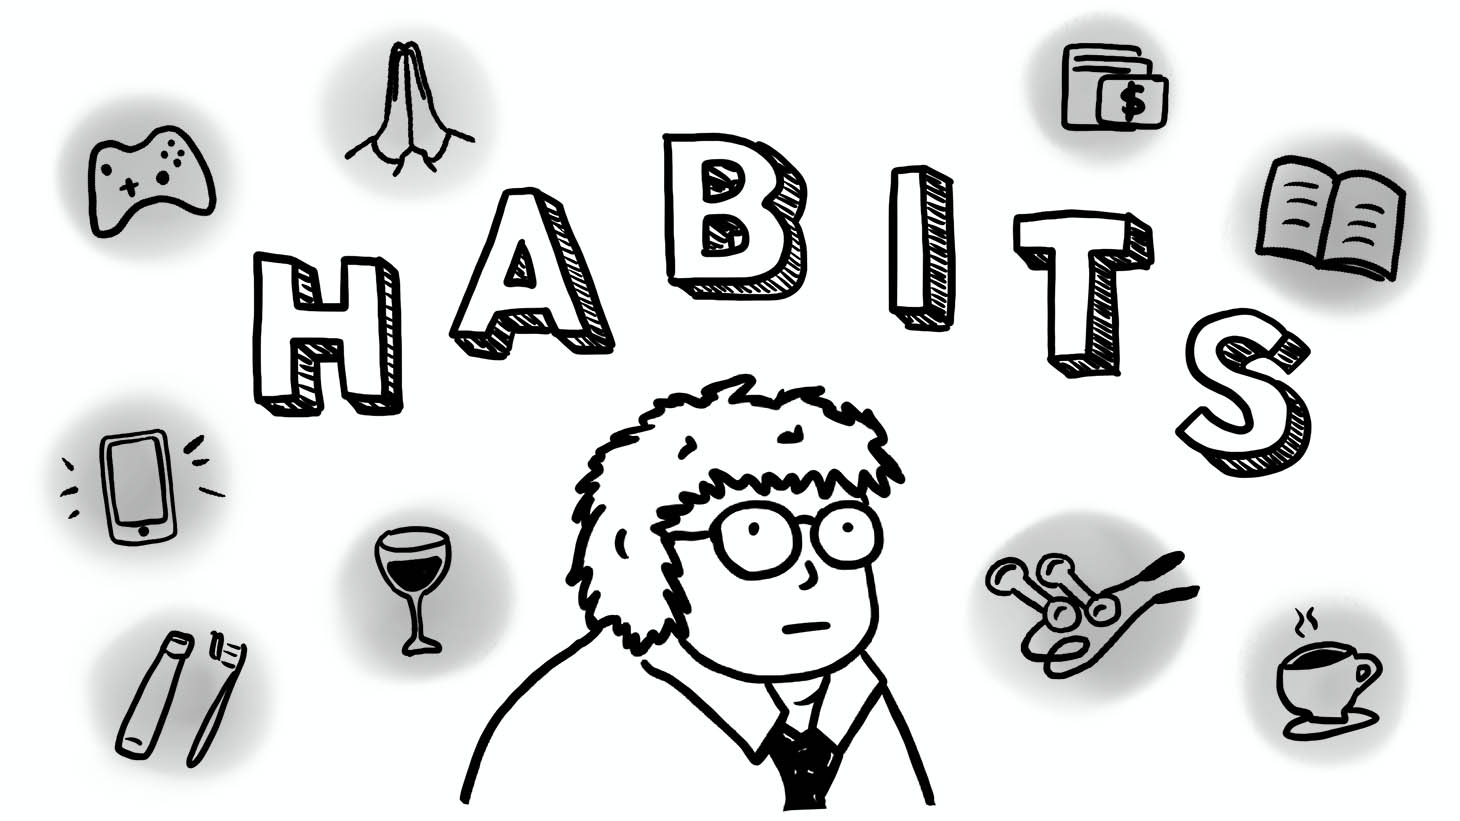 Looking Closer: Why do good people develop bad habits?